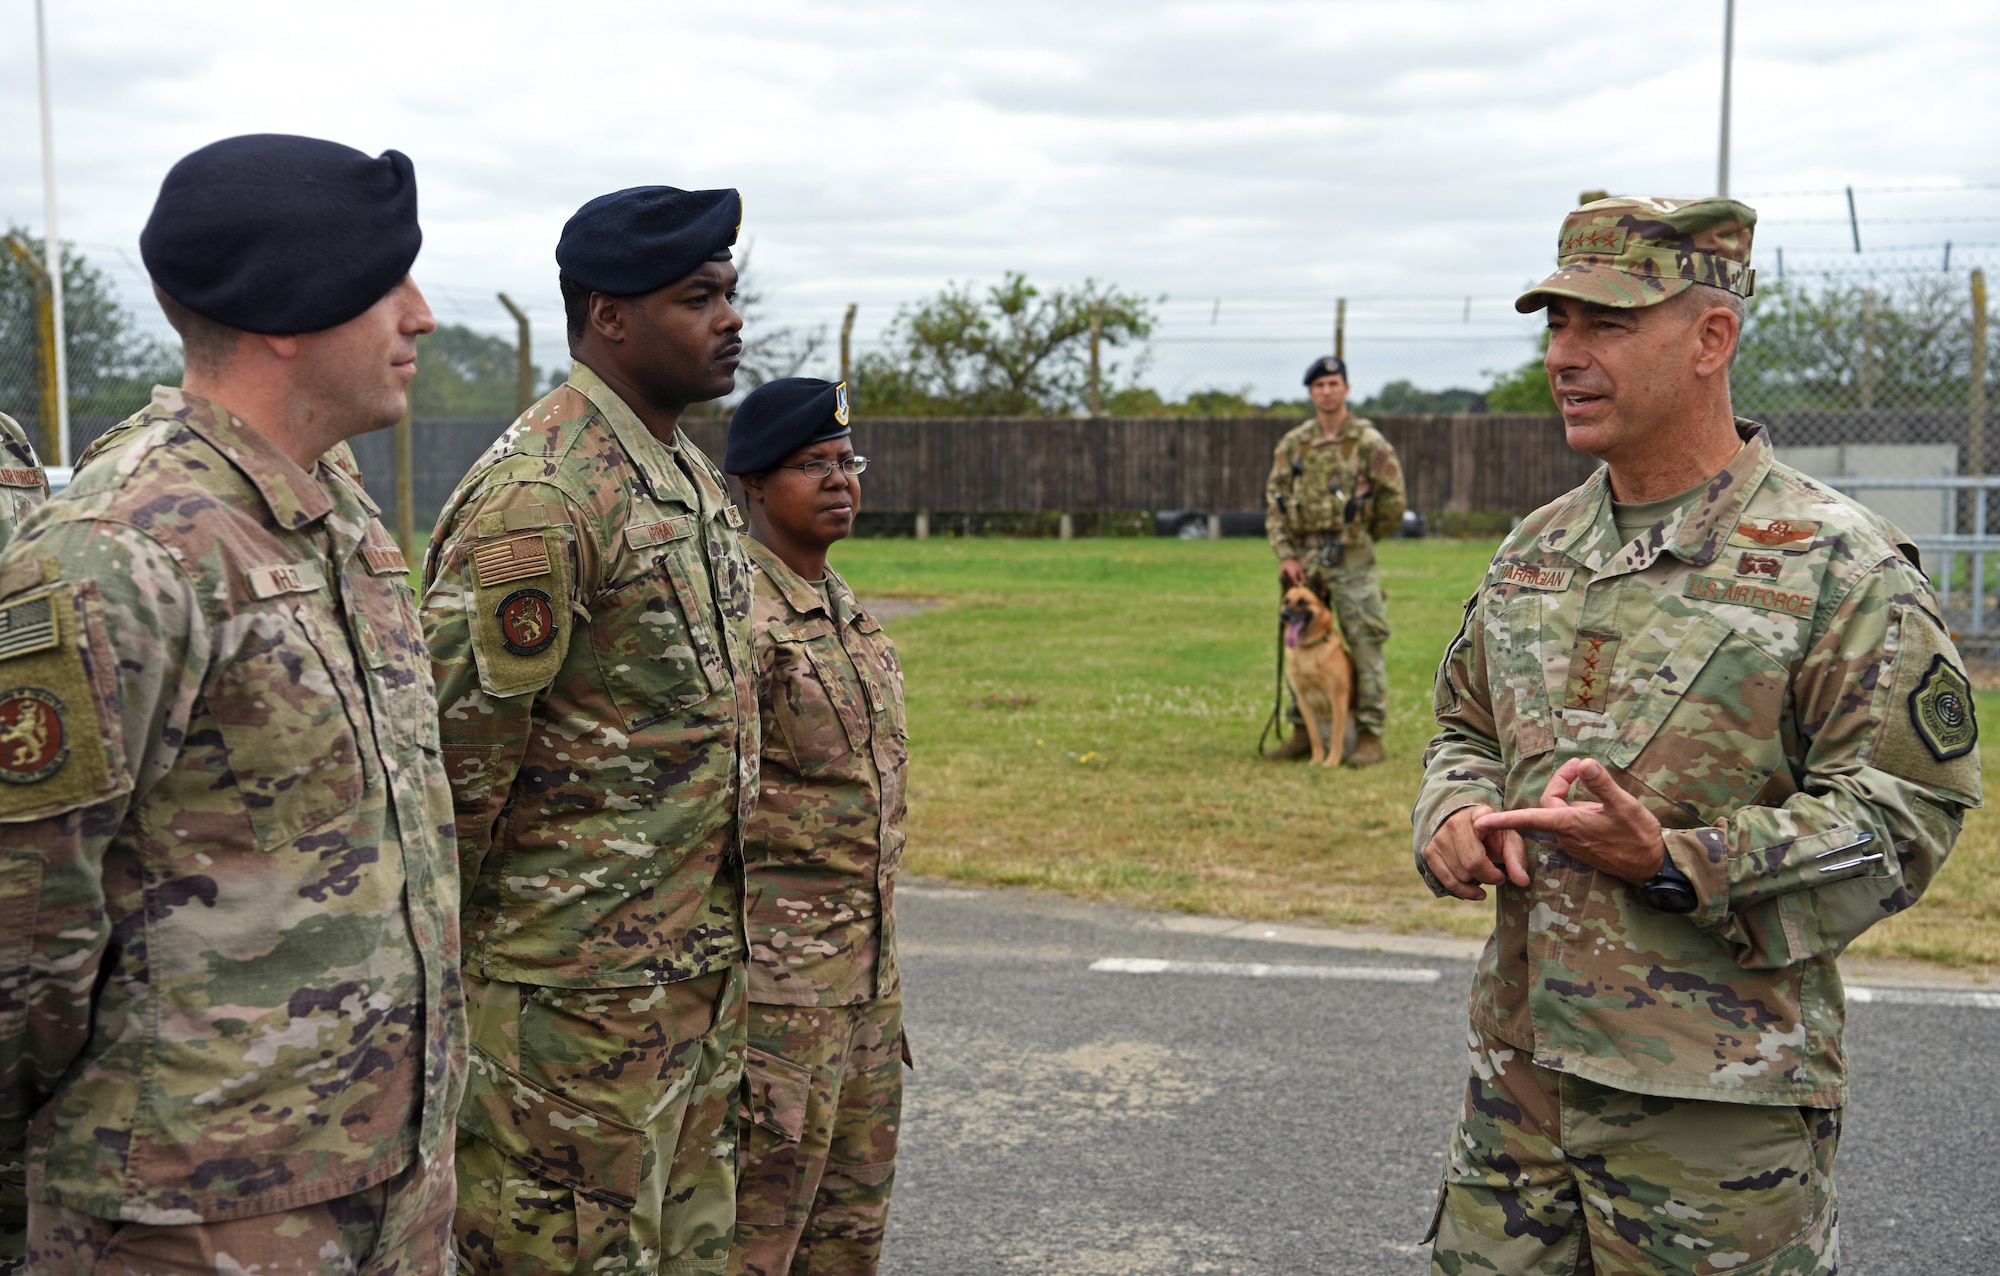 U.S. Air Force Gen. Jeff Harrigian, U.S. Air Forces in Europe – Air Forces Africa commander, discusses security measures with members of the 100th Security Forces Squadron at RAF Mildenhall, England, July 15, 2019. Harrigian made his first visit to RAF Mildenhall since assuming command in May 2019, speaking to Airmen on the importance of their mission and highlighting his vision. (U.S. Air Force photo by Airman 1st Class Brandon Esau)